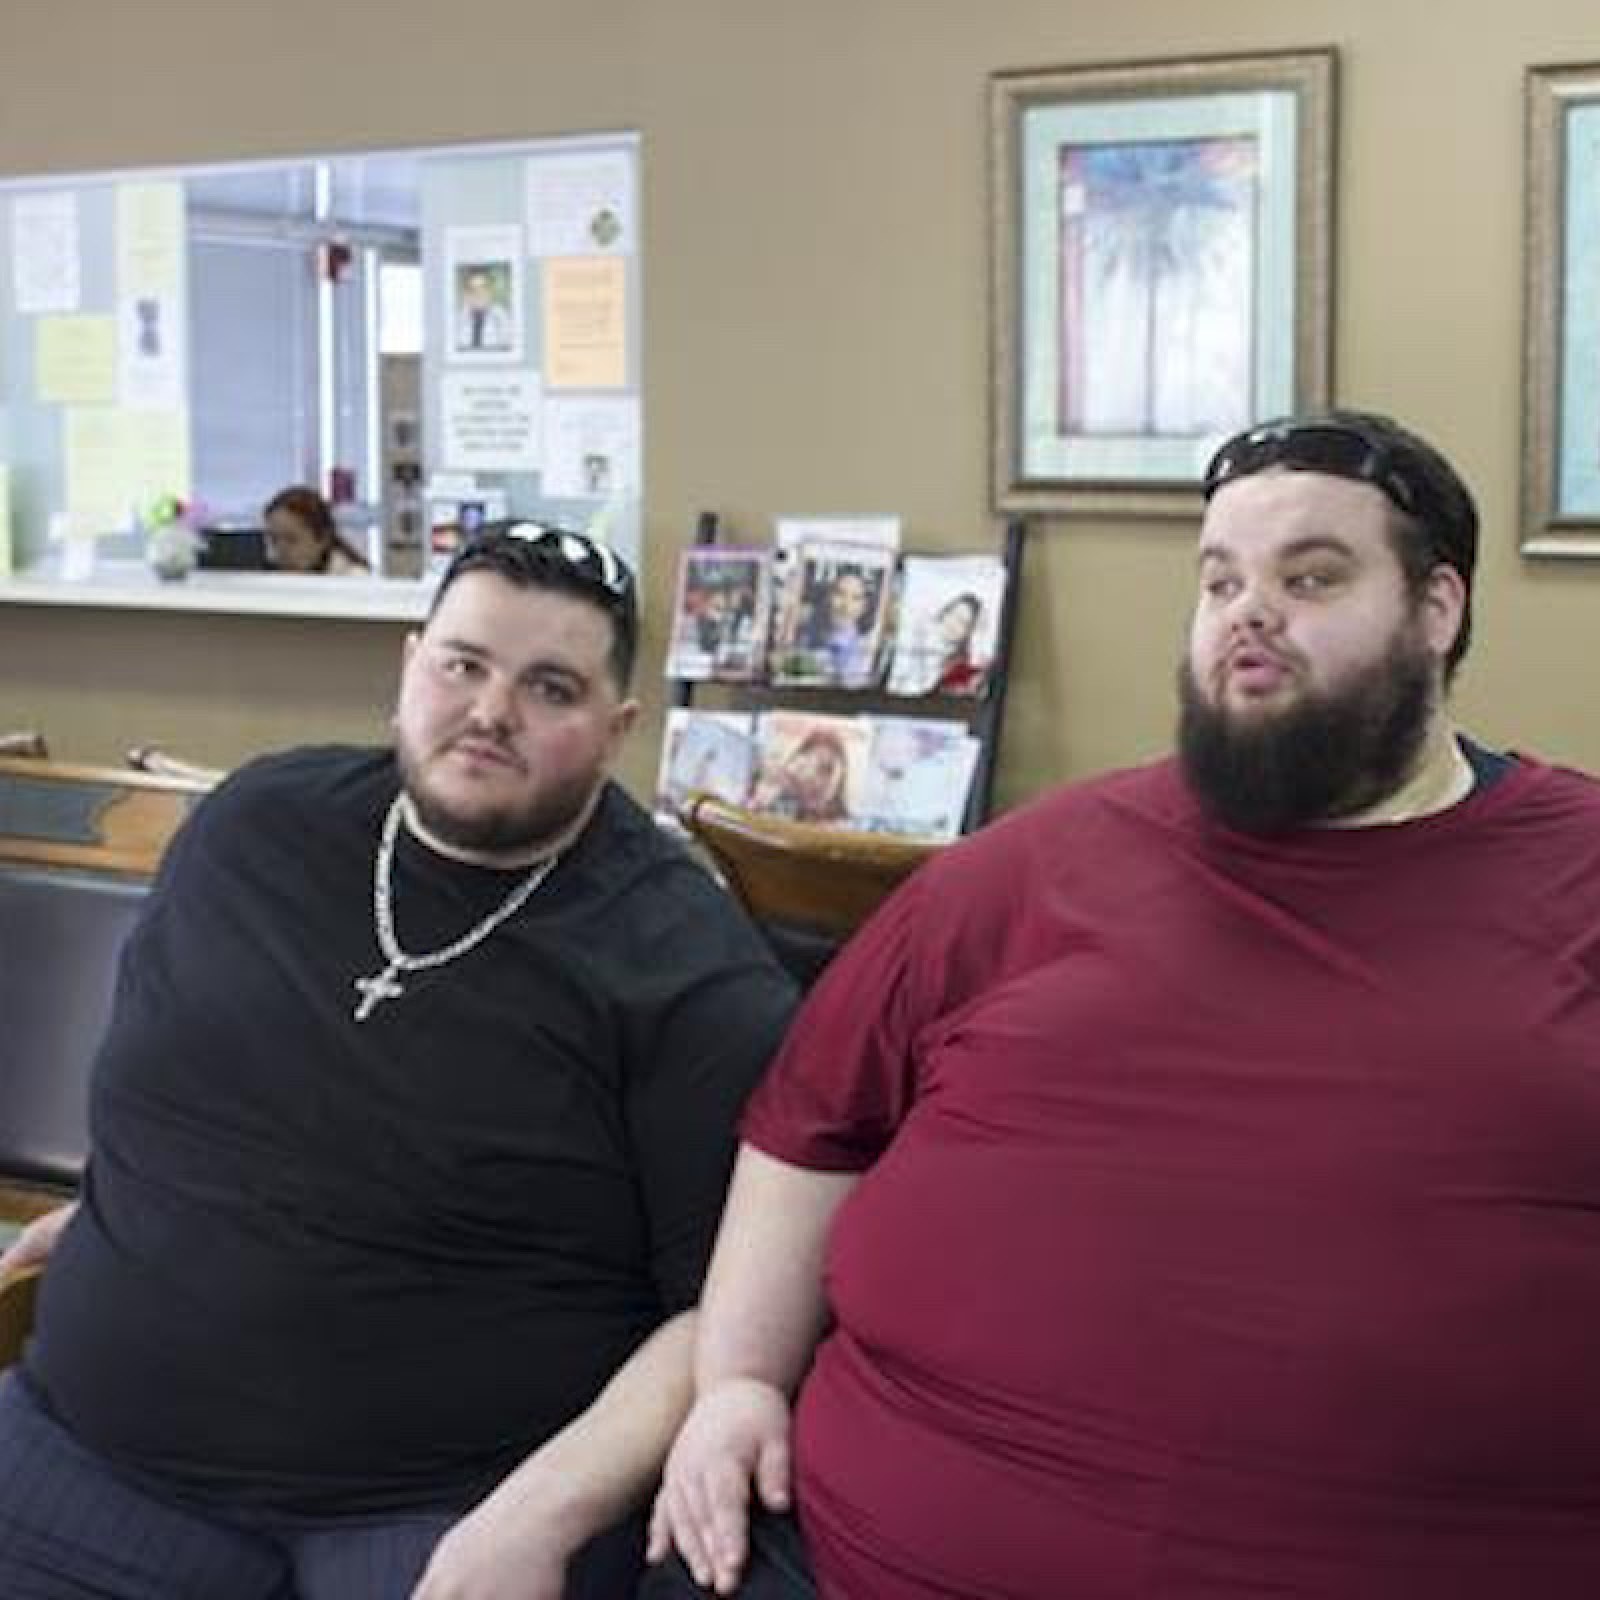 My 600-lb Life' Season 11 Release Date, Cast, and More - IMDb